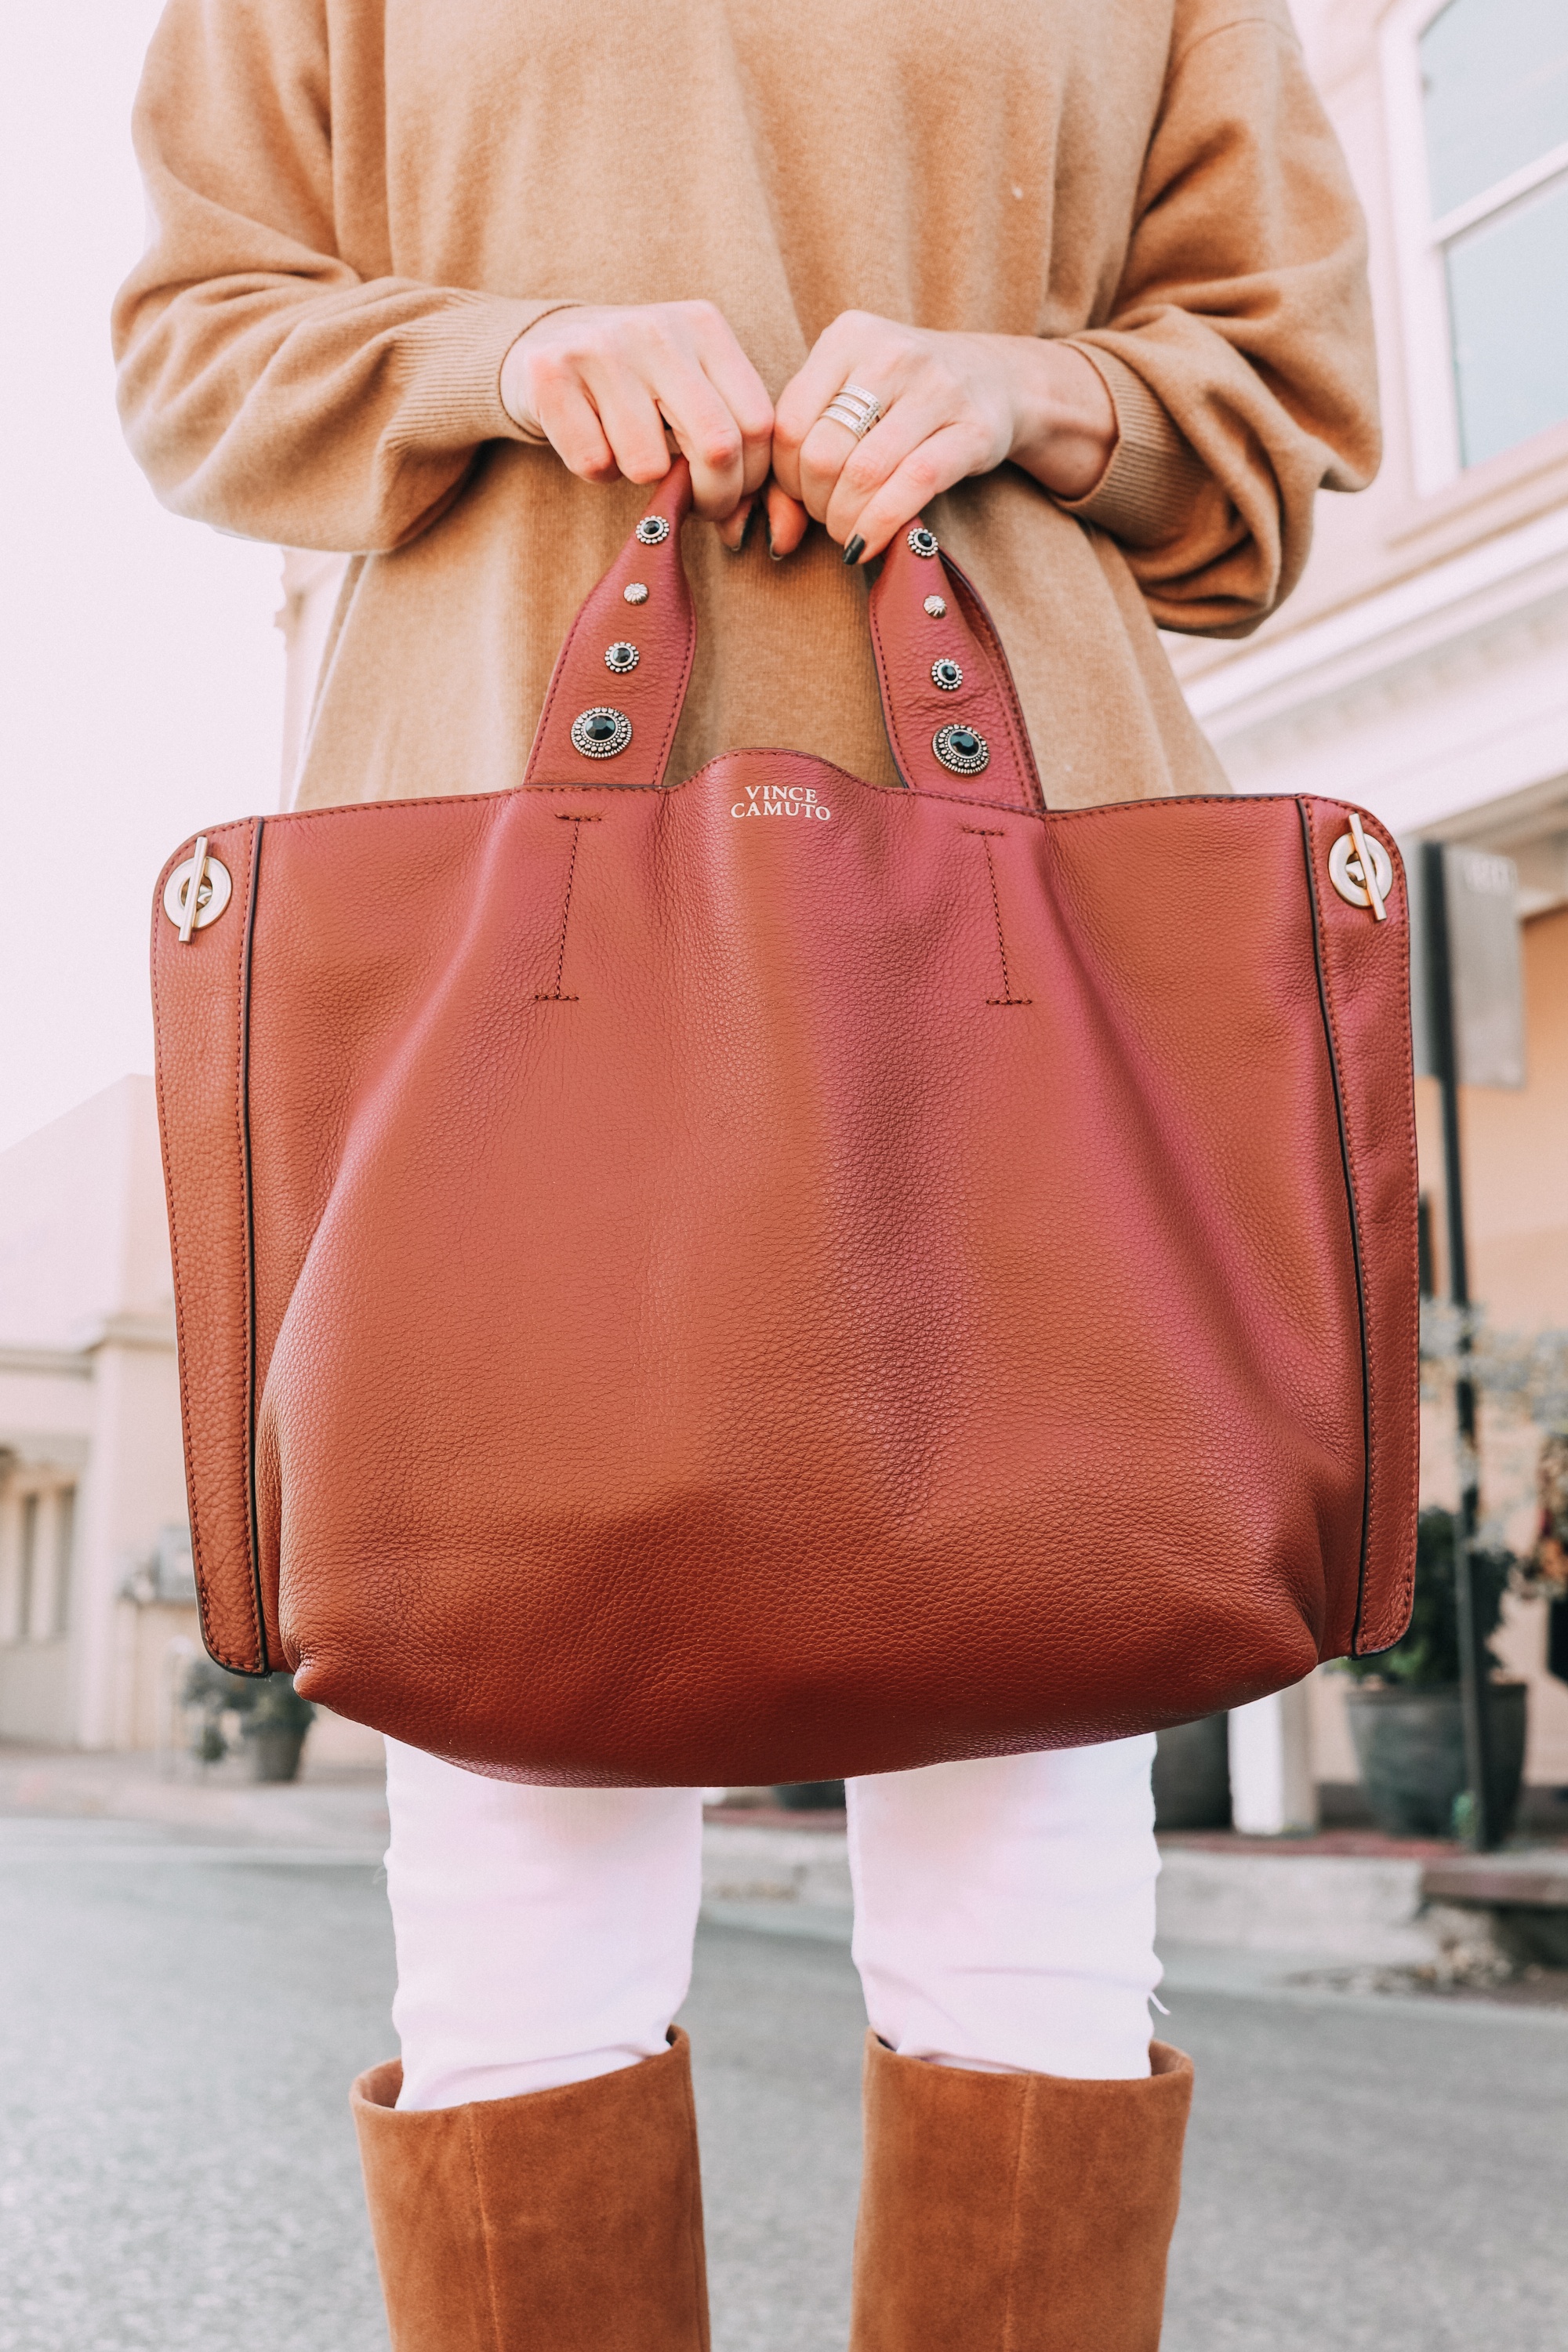 how to find the perfect handbag, Fashion blogger Busbee Stye carrying robin tote from Vince Camuto wearing white jeans and camel sweater in Santa Fe, NM, how to find the perfect handbag